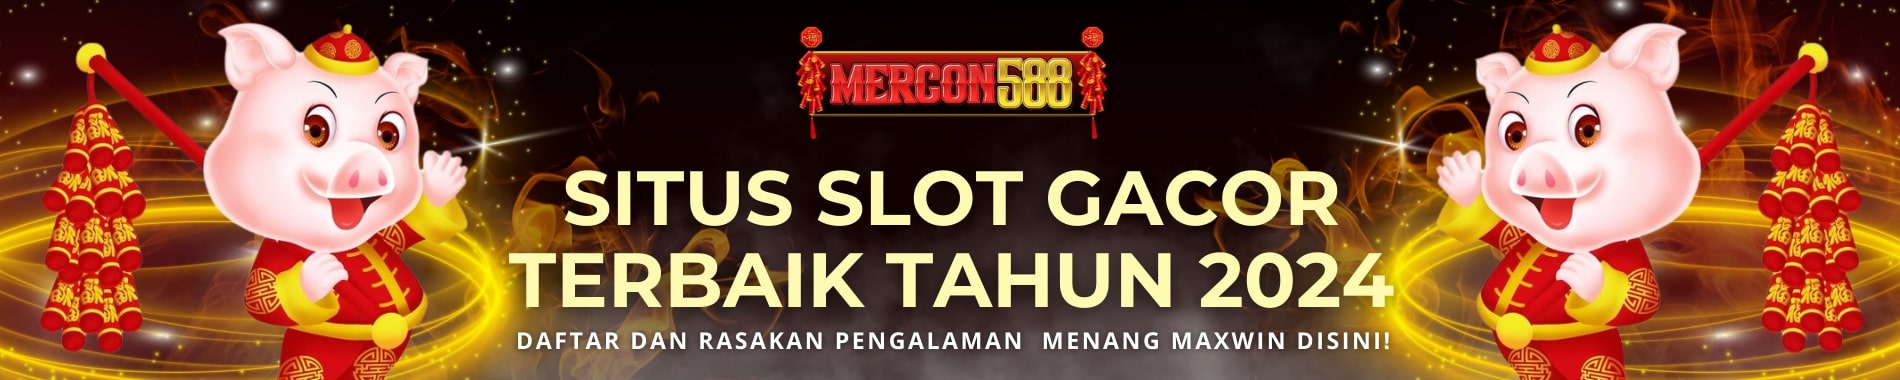 welcome mercon588